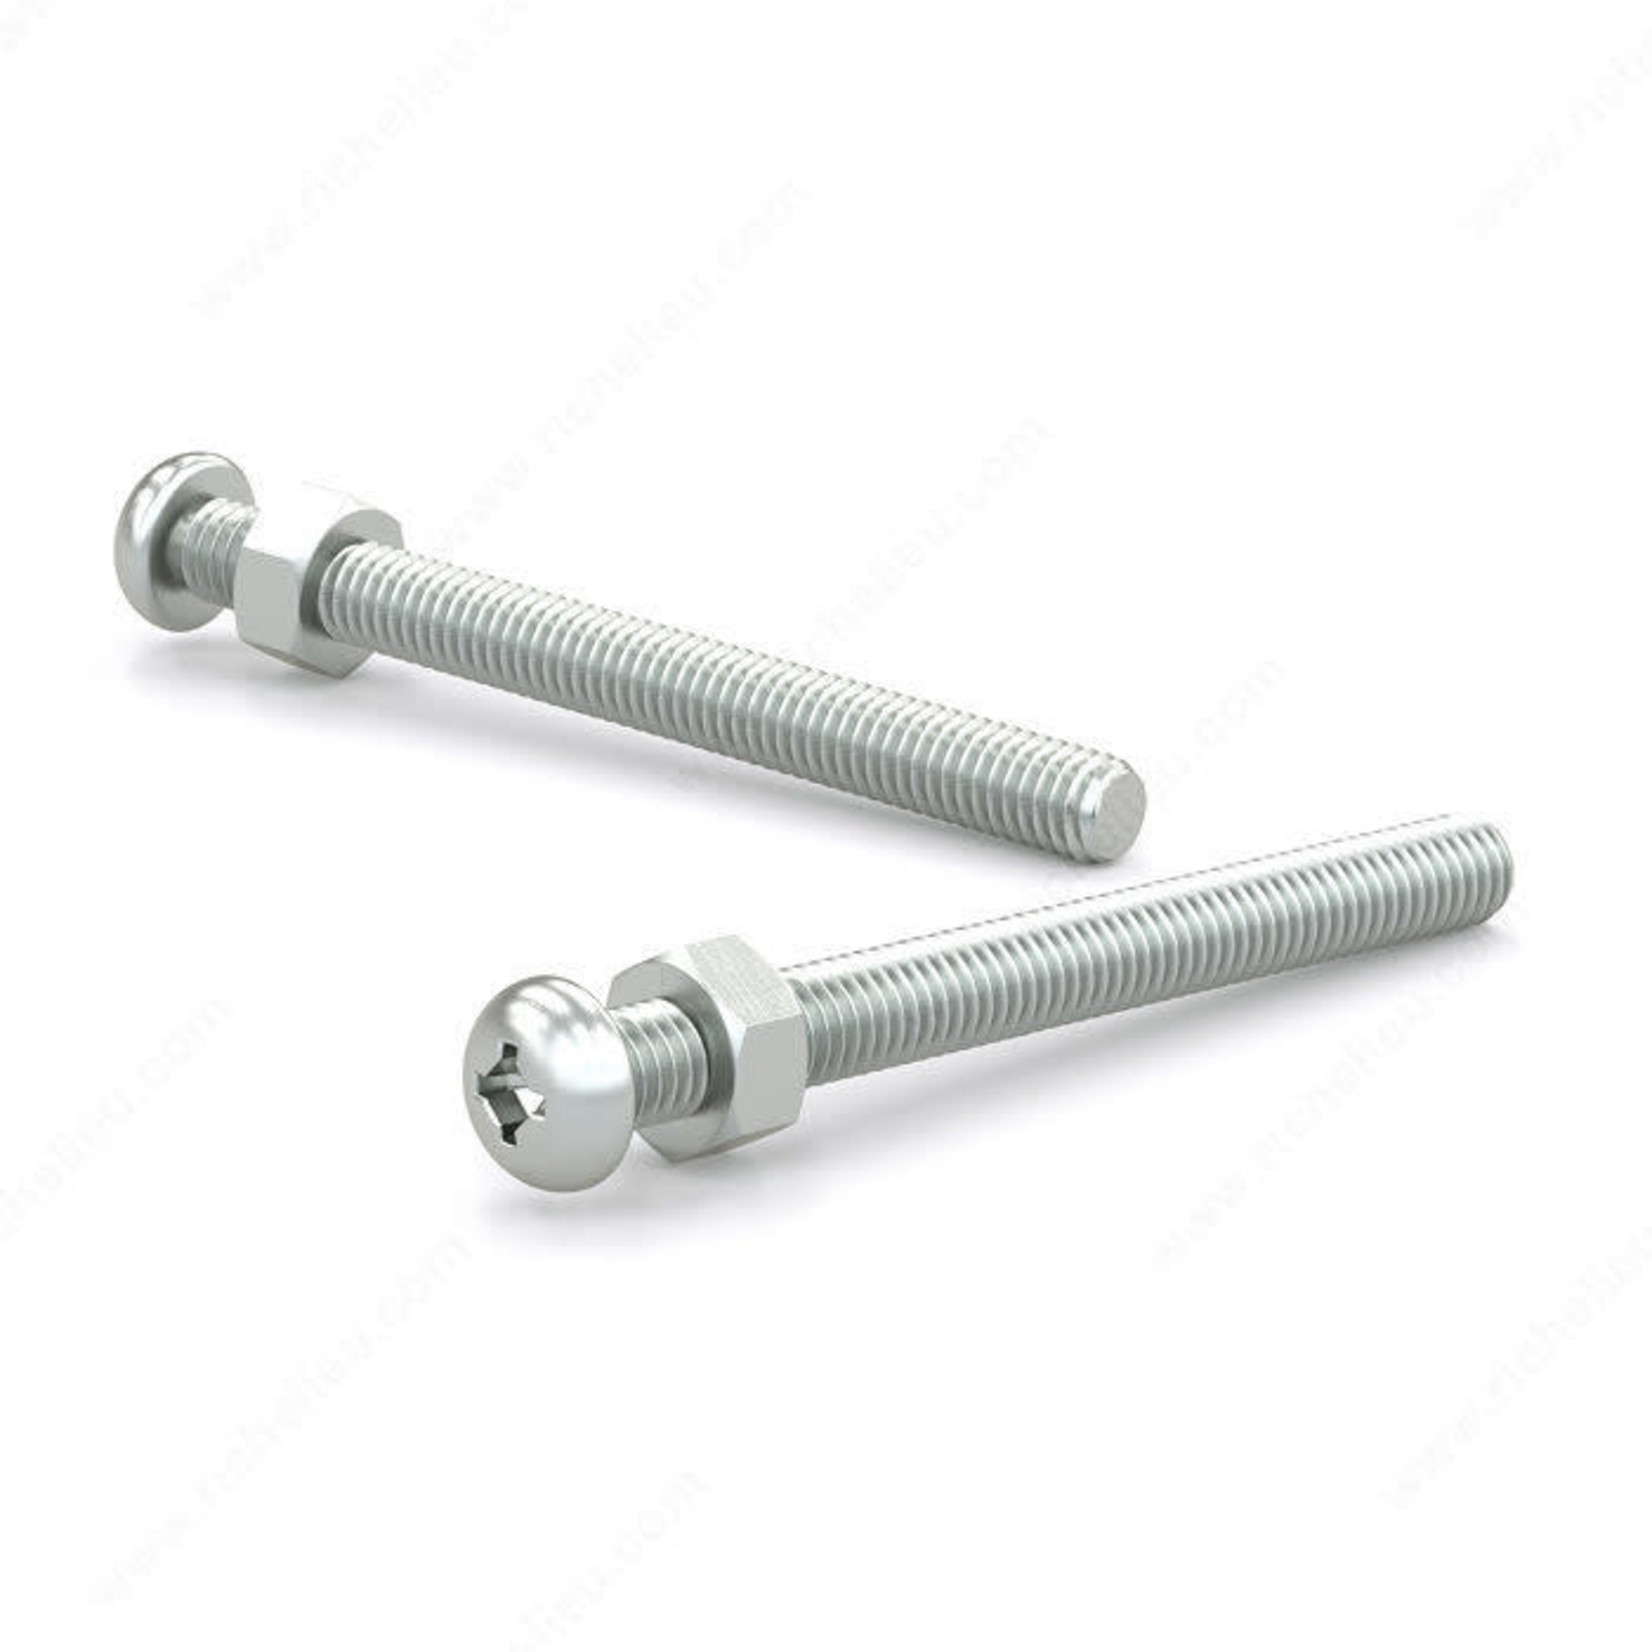 RELIABLE MACHINE SCREW WITH NUT, PAN HEAD, 1/4" 2IN, 5PK BLISTER